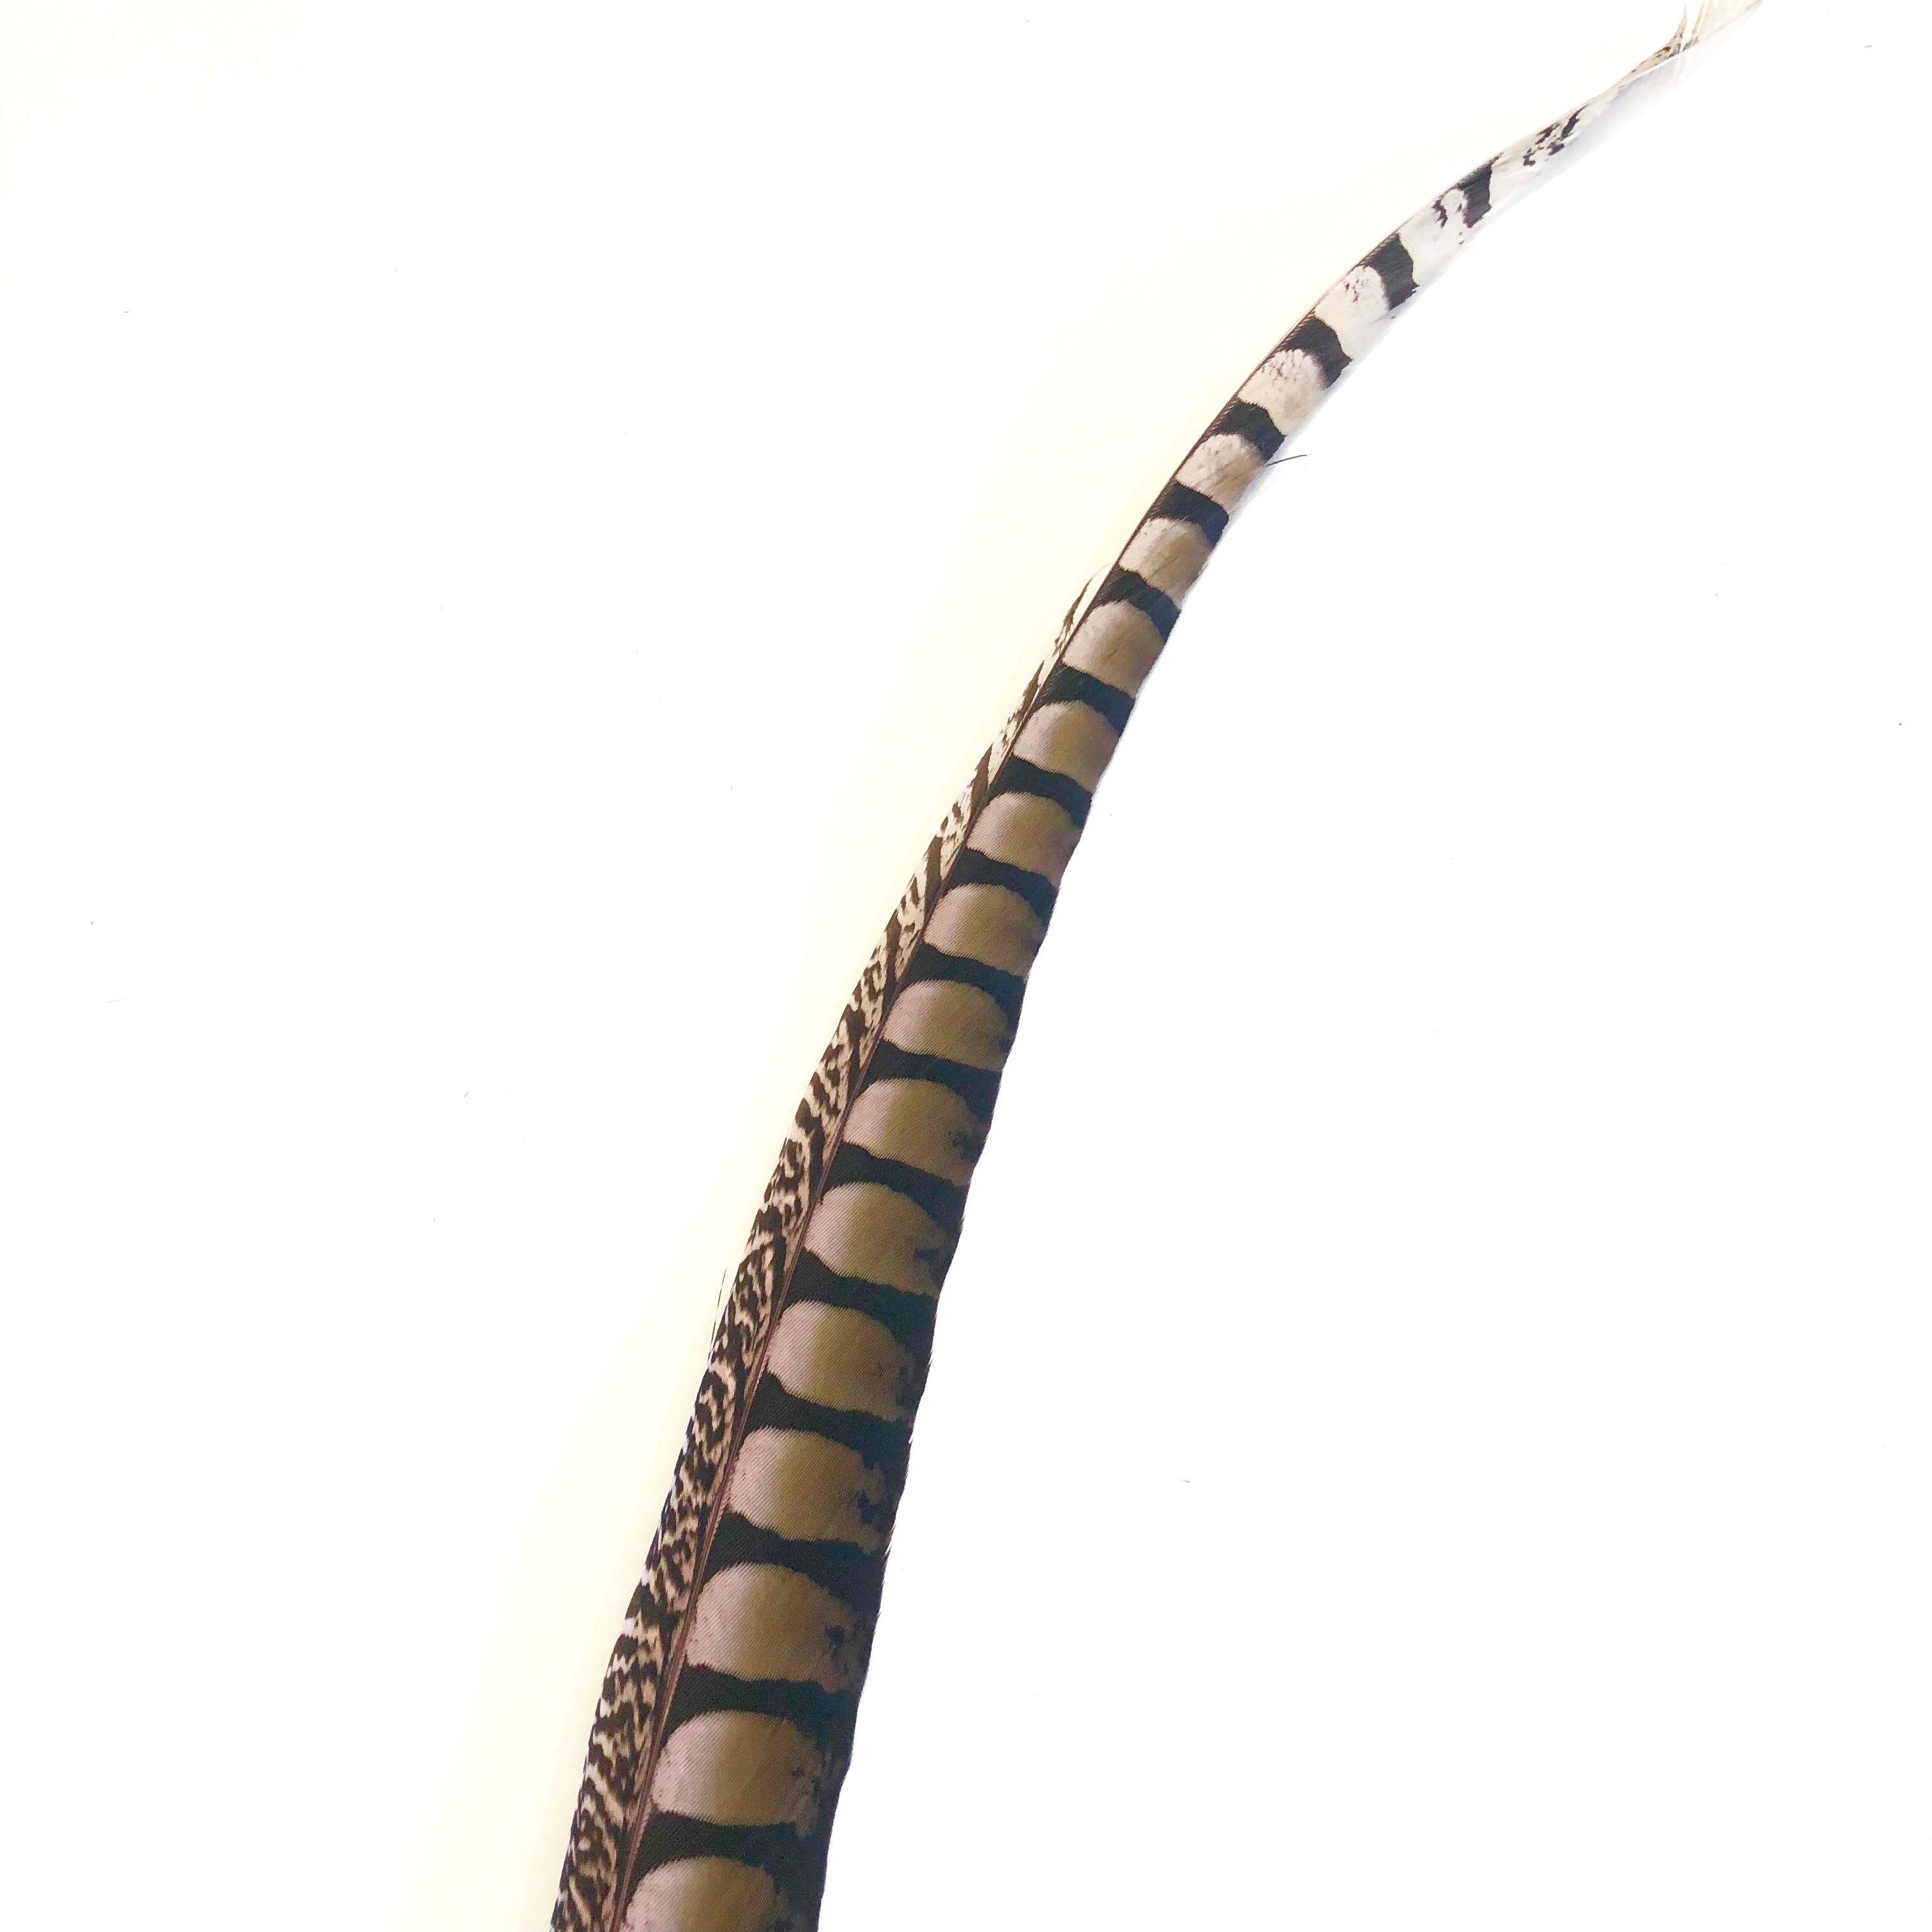 30" to 38" Lady Amherst Pheasant Side Tail Feather - Pink ((SECONDS))